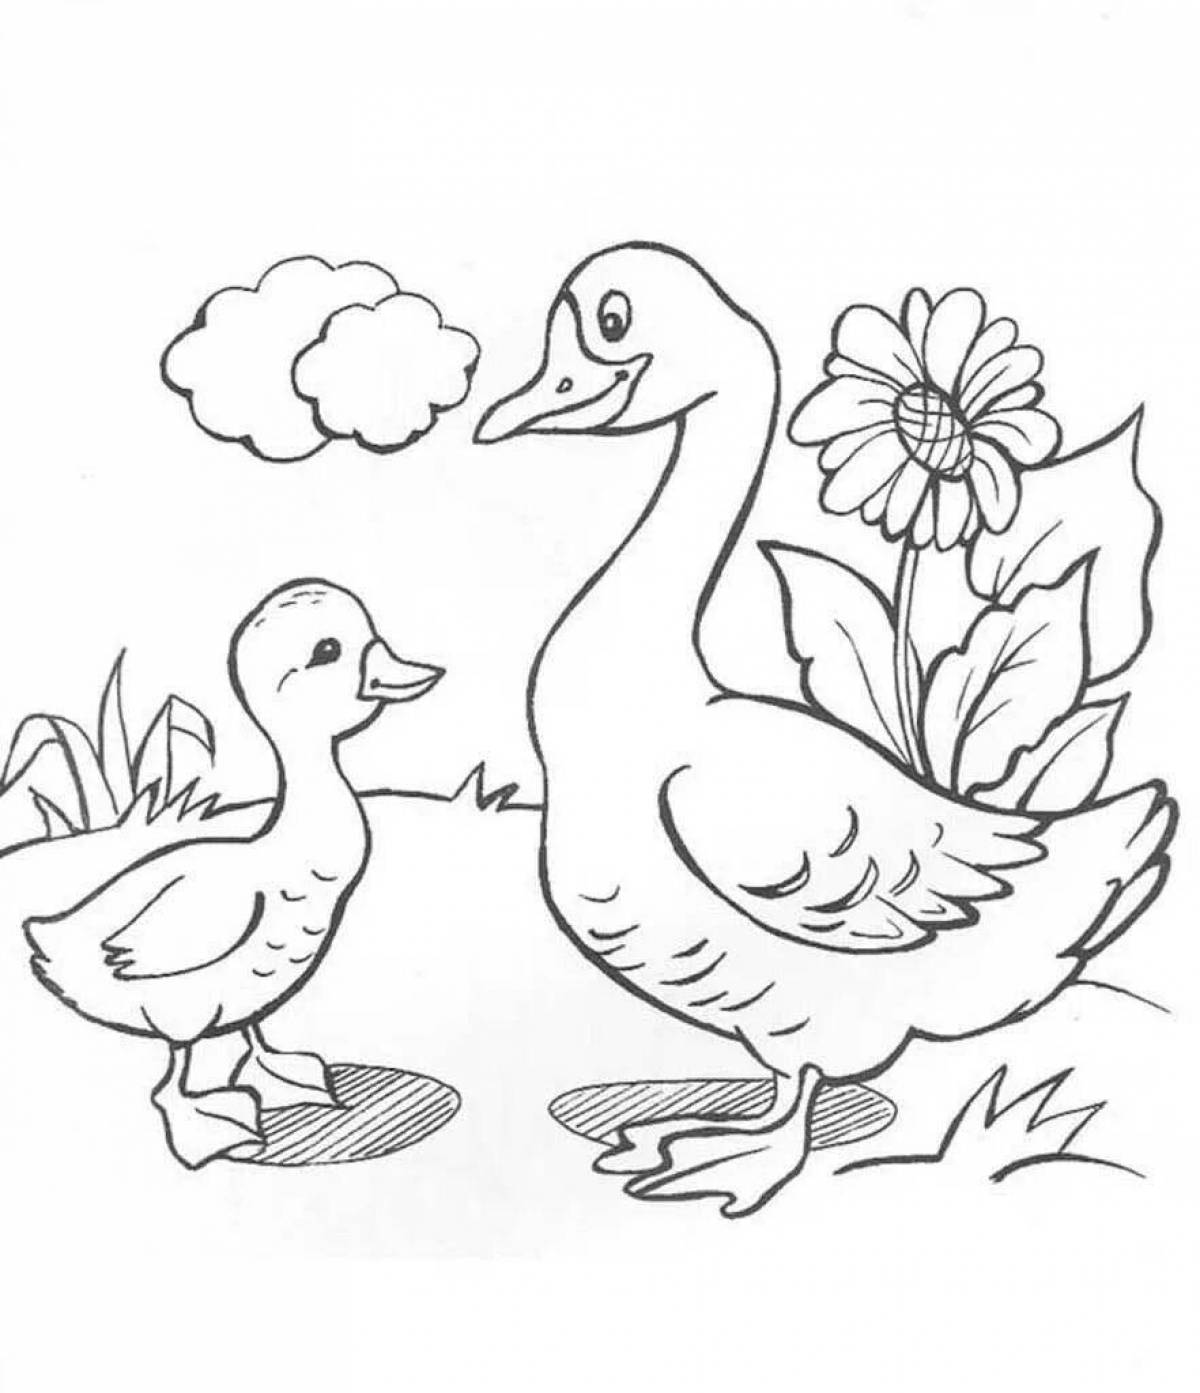 Creative bird coloring page for 6-7 year olds